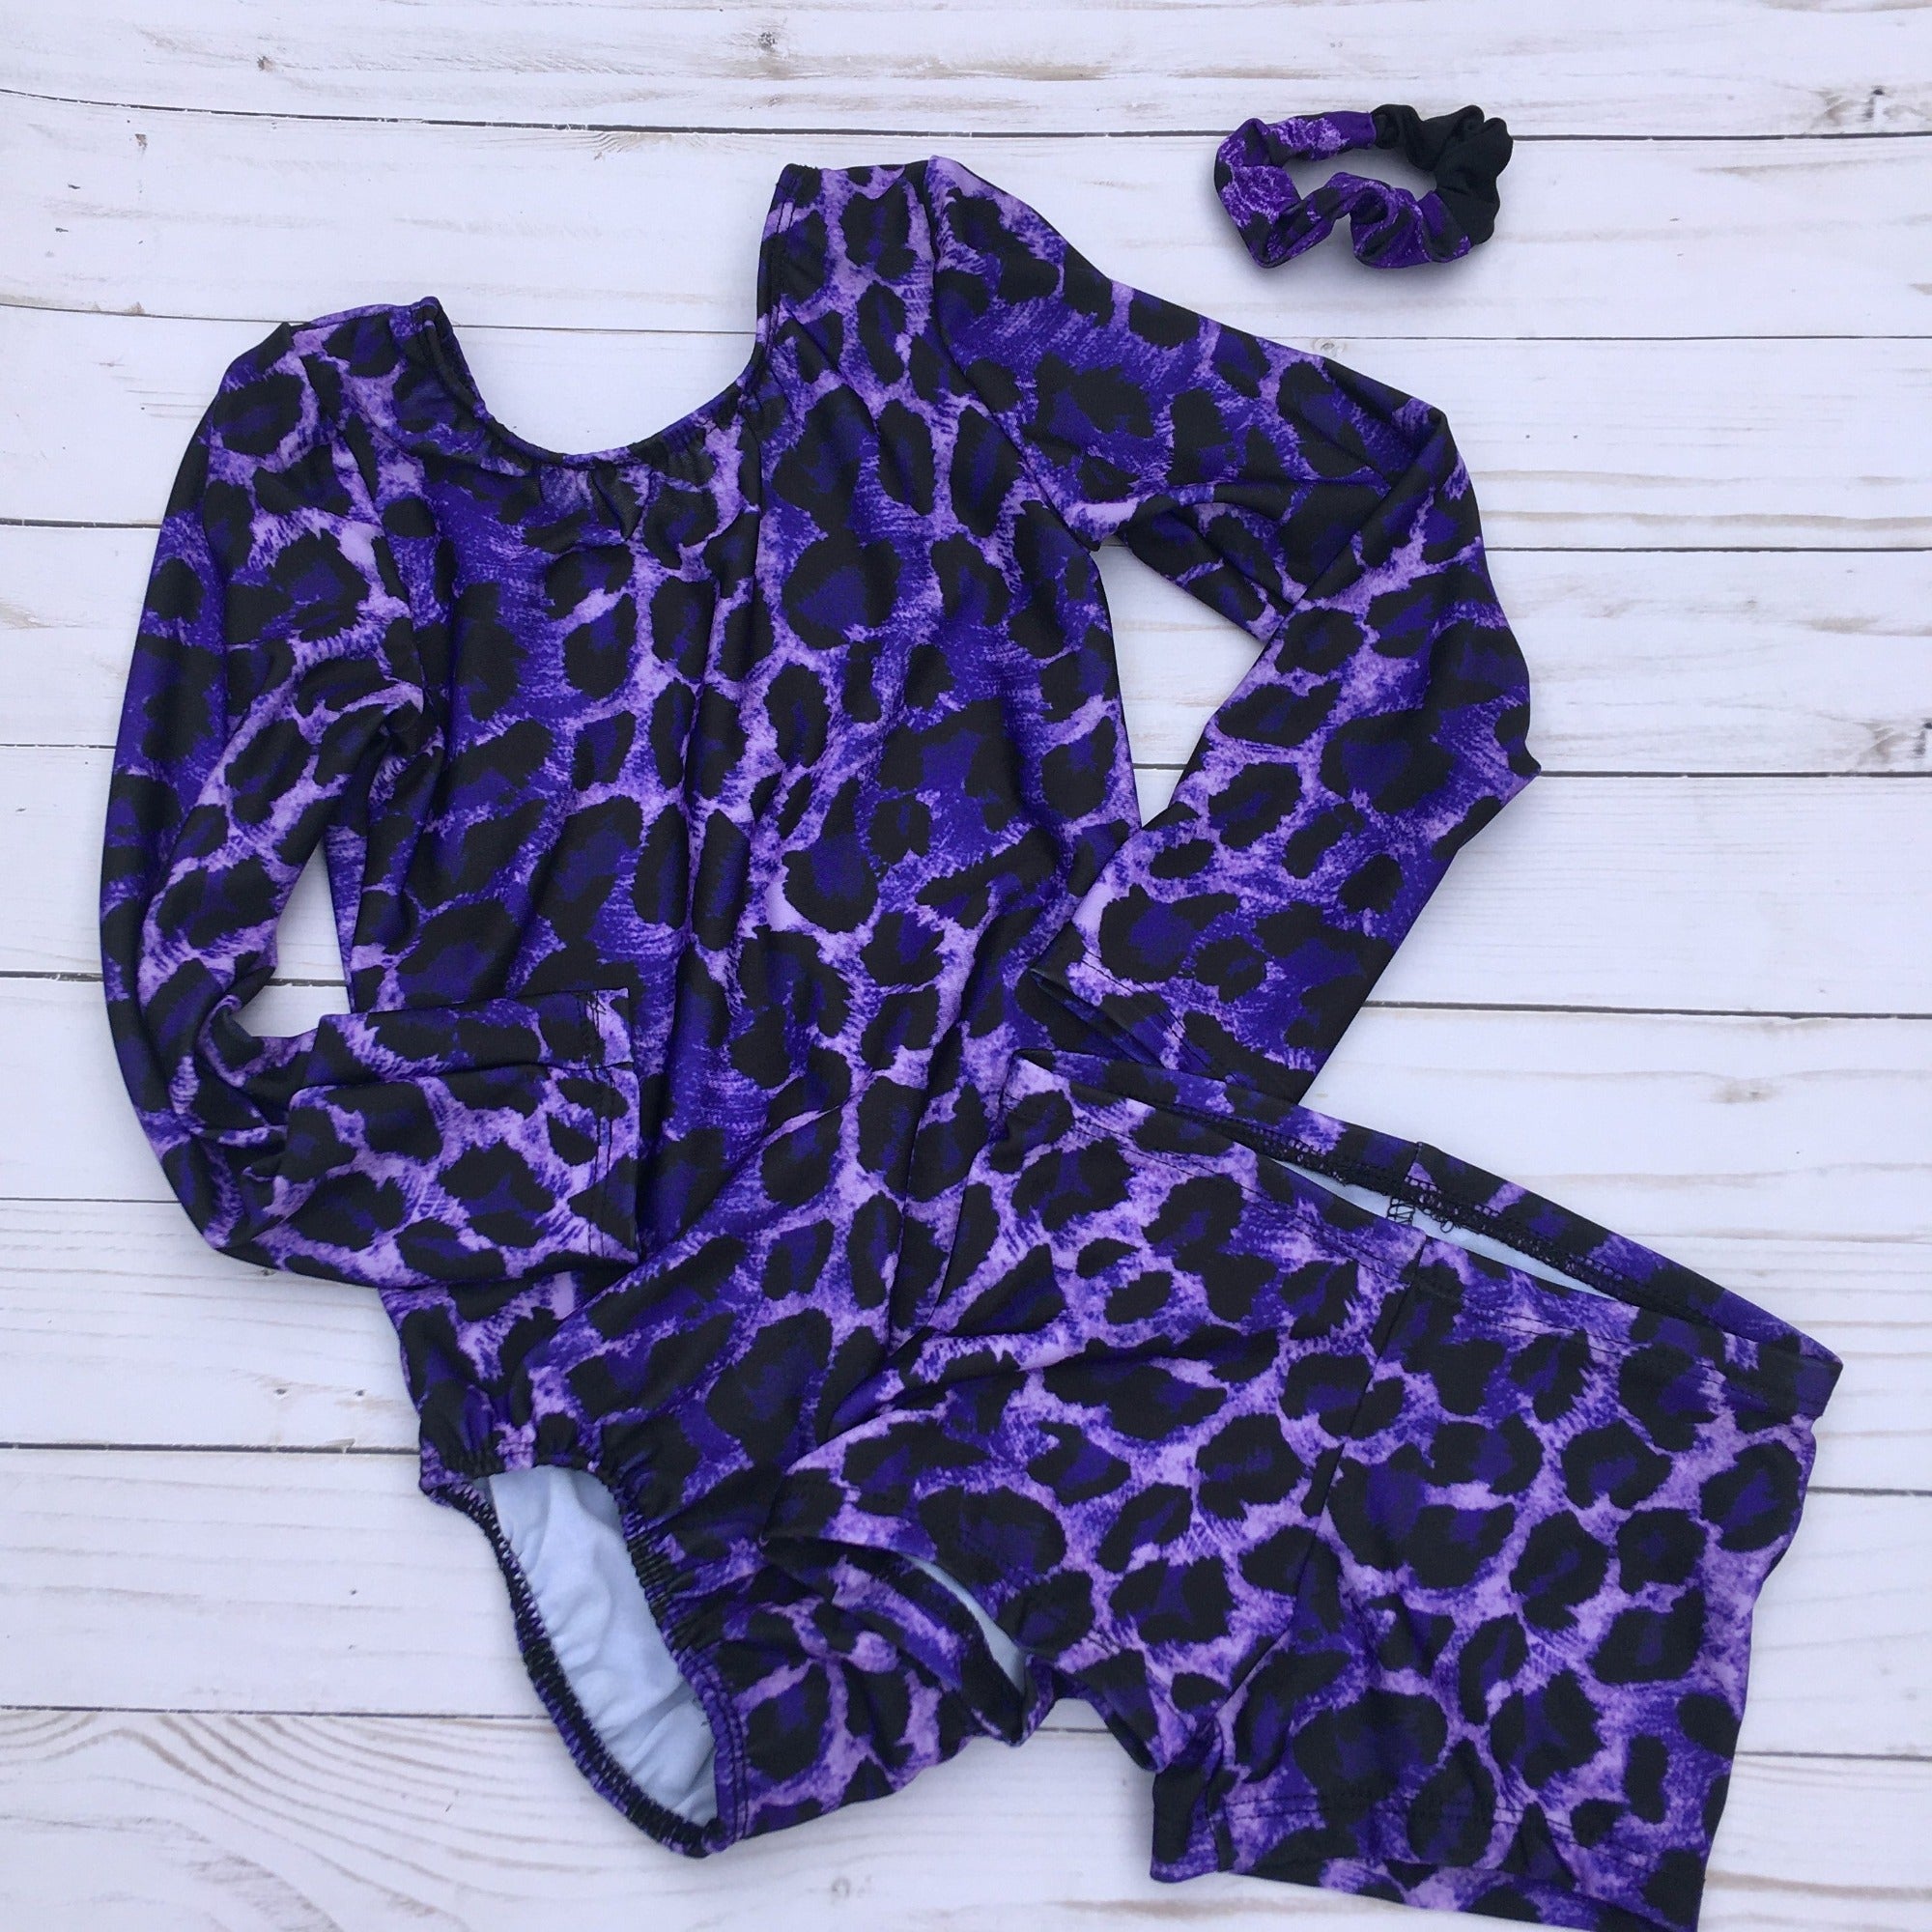 long sleeve gymnastics or dance leotard in purple and black leopard print with matching shorts and scrunchie